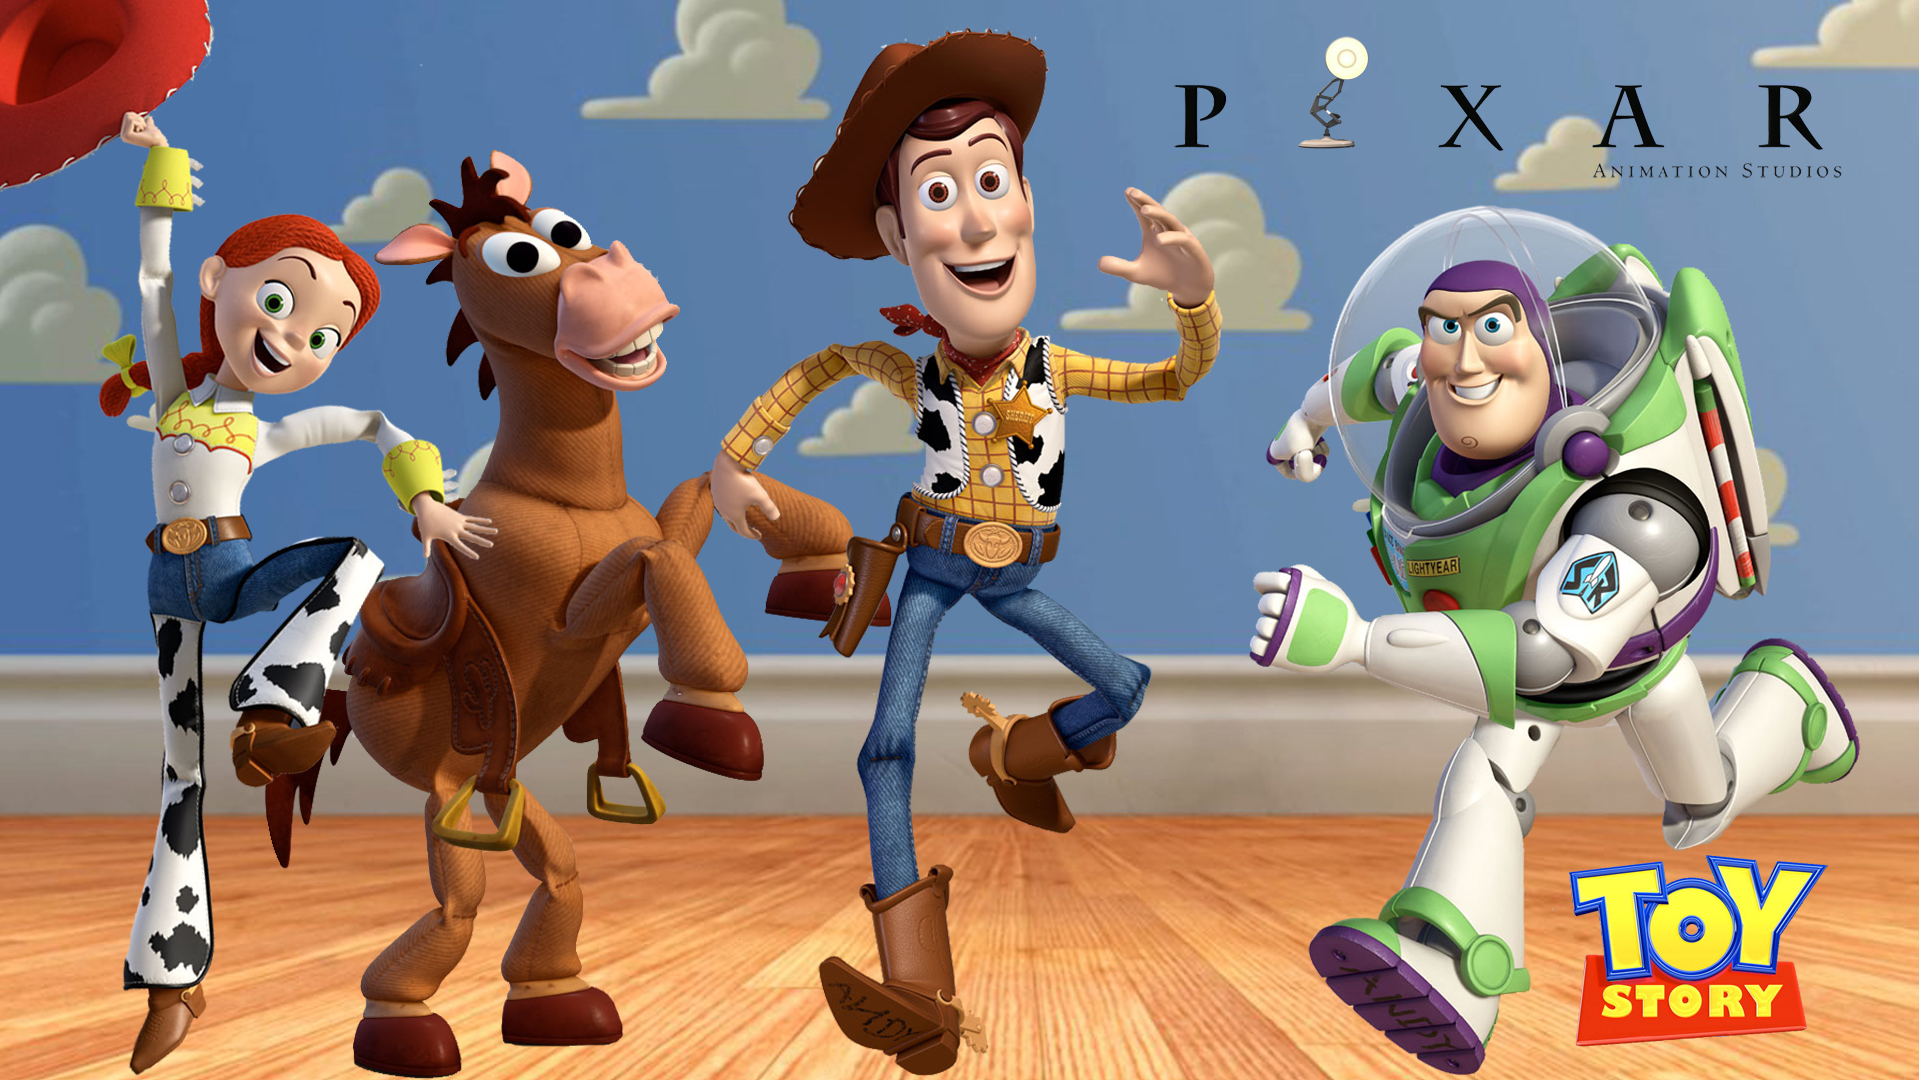 The best 3D animated movies of all time: one of them is Toy Story